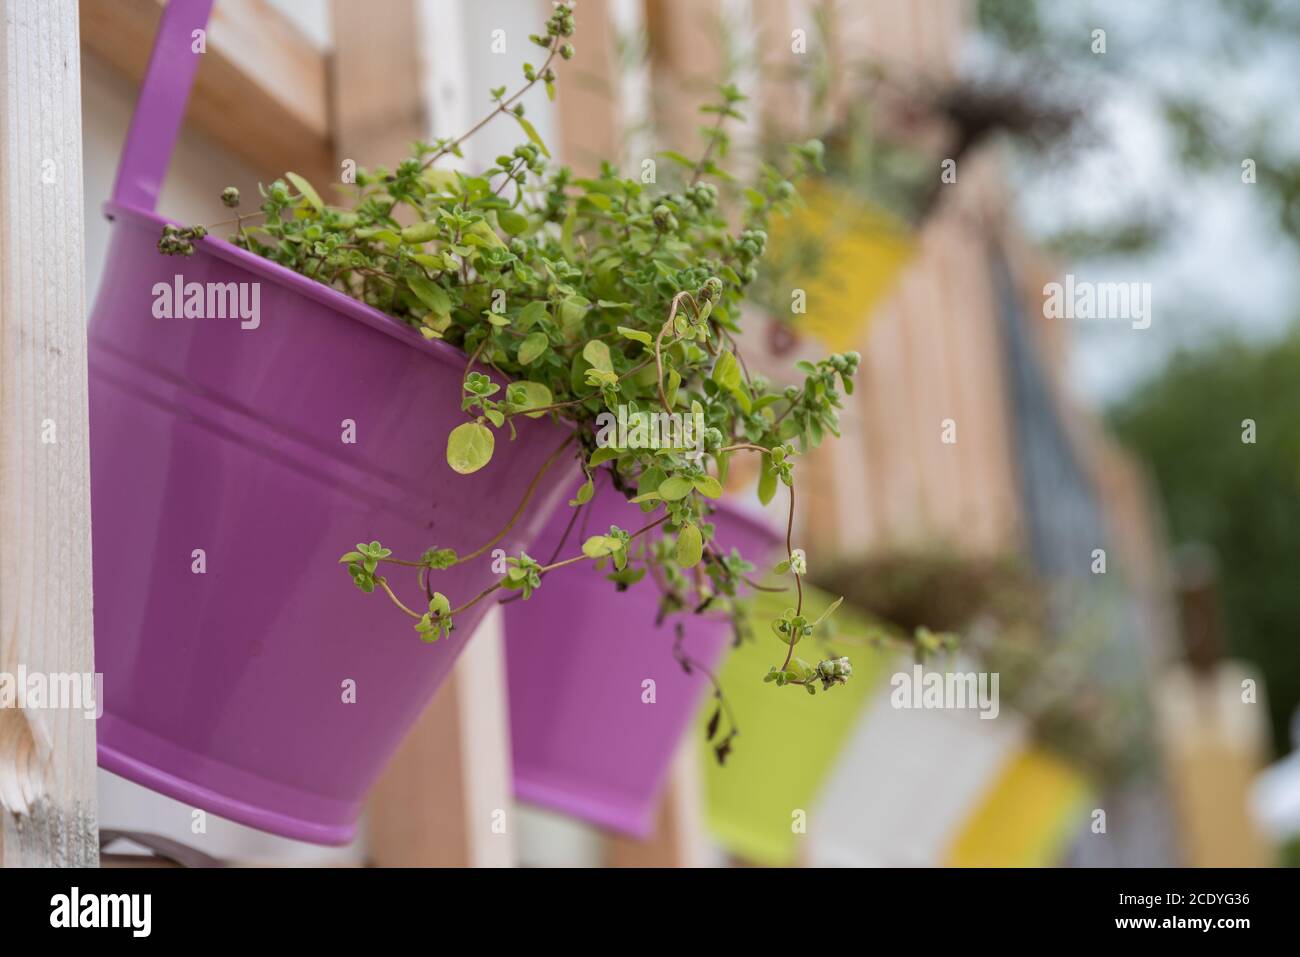 Spice plants in decorative hanging pots on the balcony Stock Photo